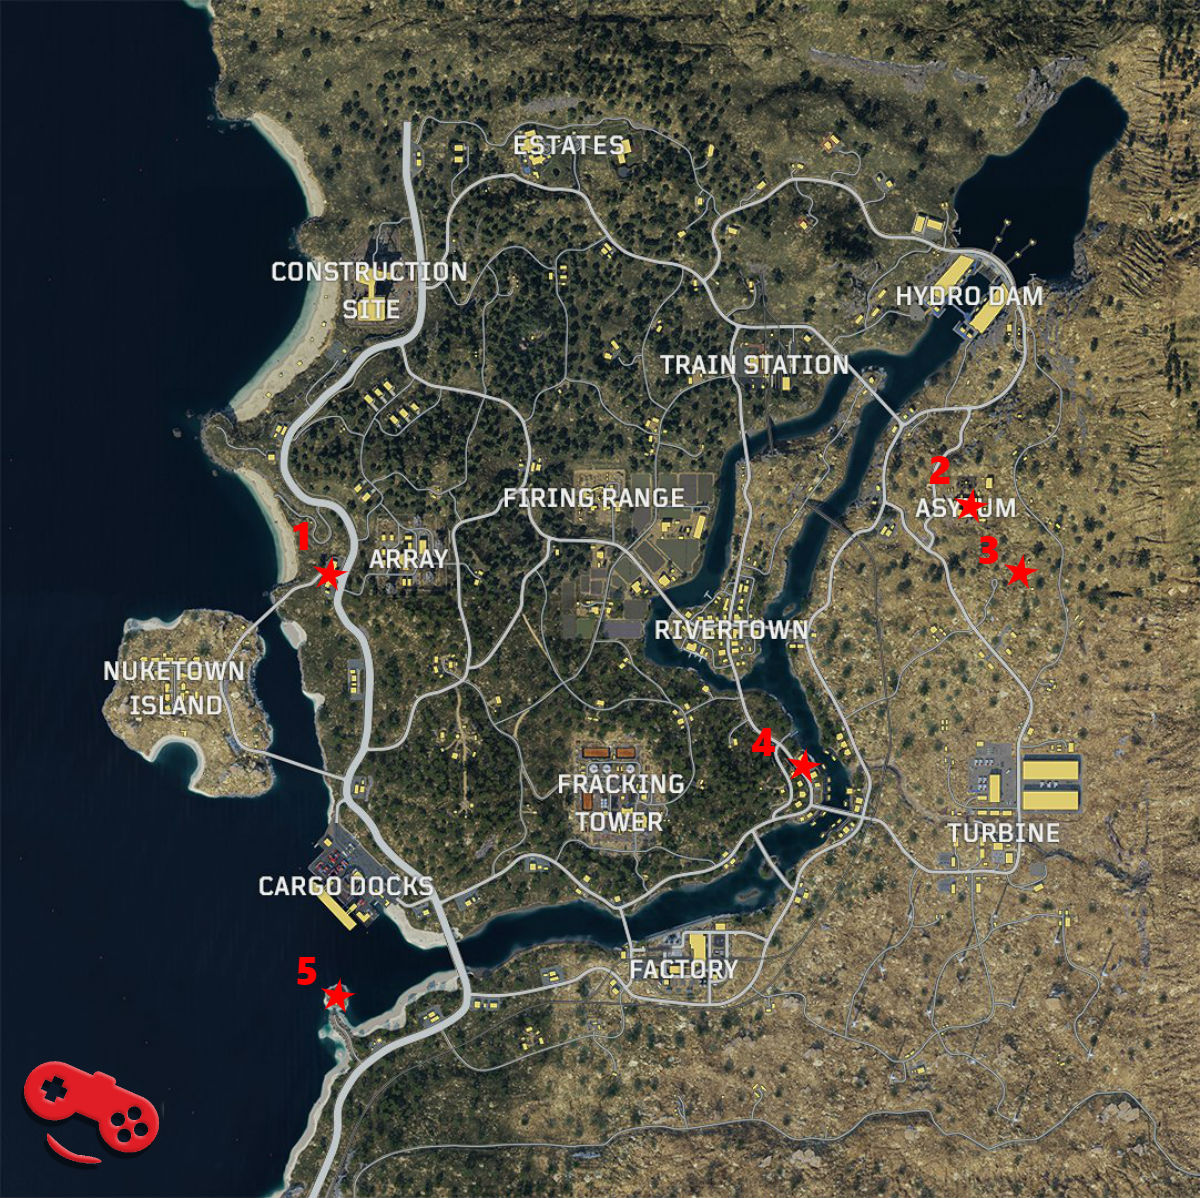 Call of Duty Black Ops 4 Blackout Zombies Locations Map